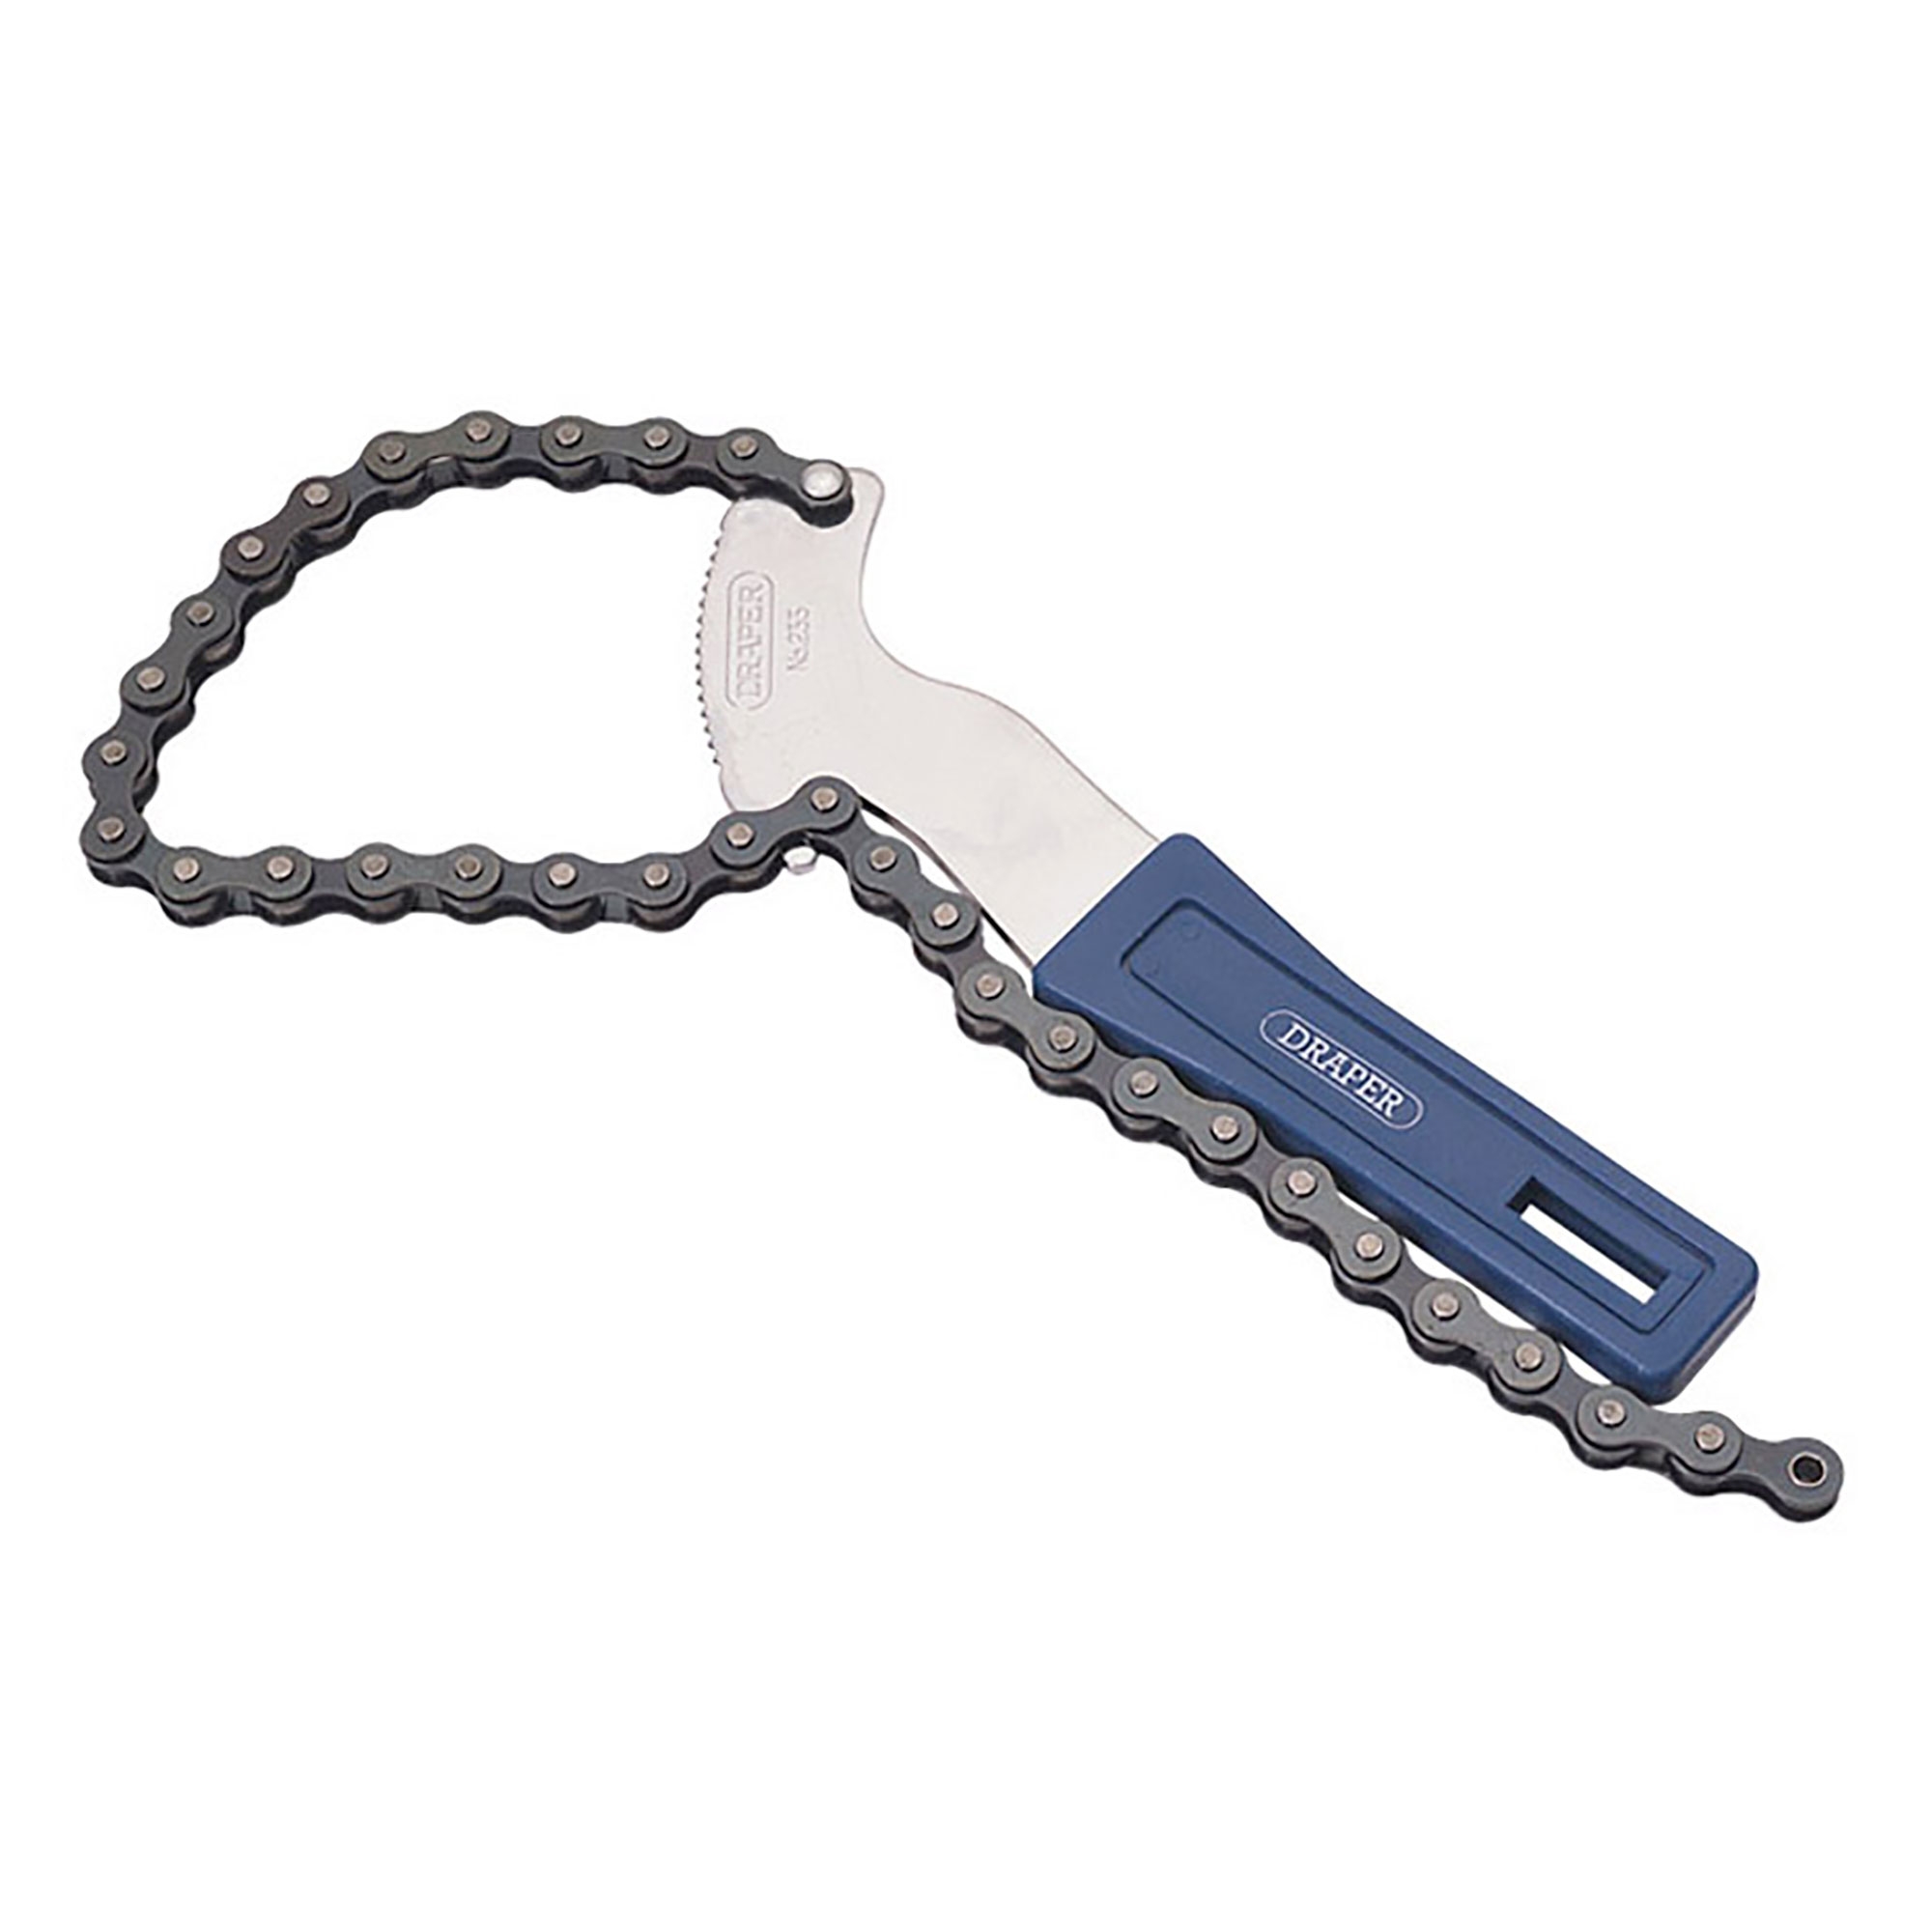 Draper 100mm Capacity Oil Filter Chain Wrench Spanner Removal Tool